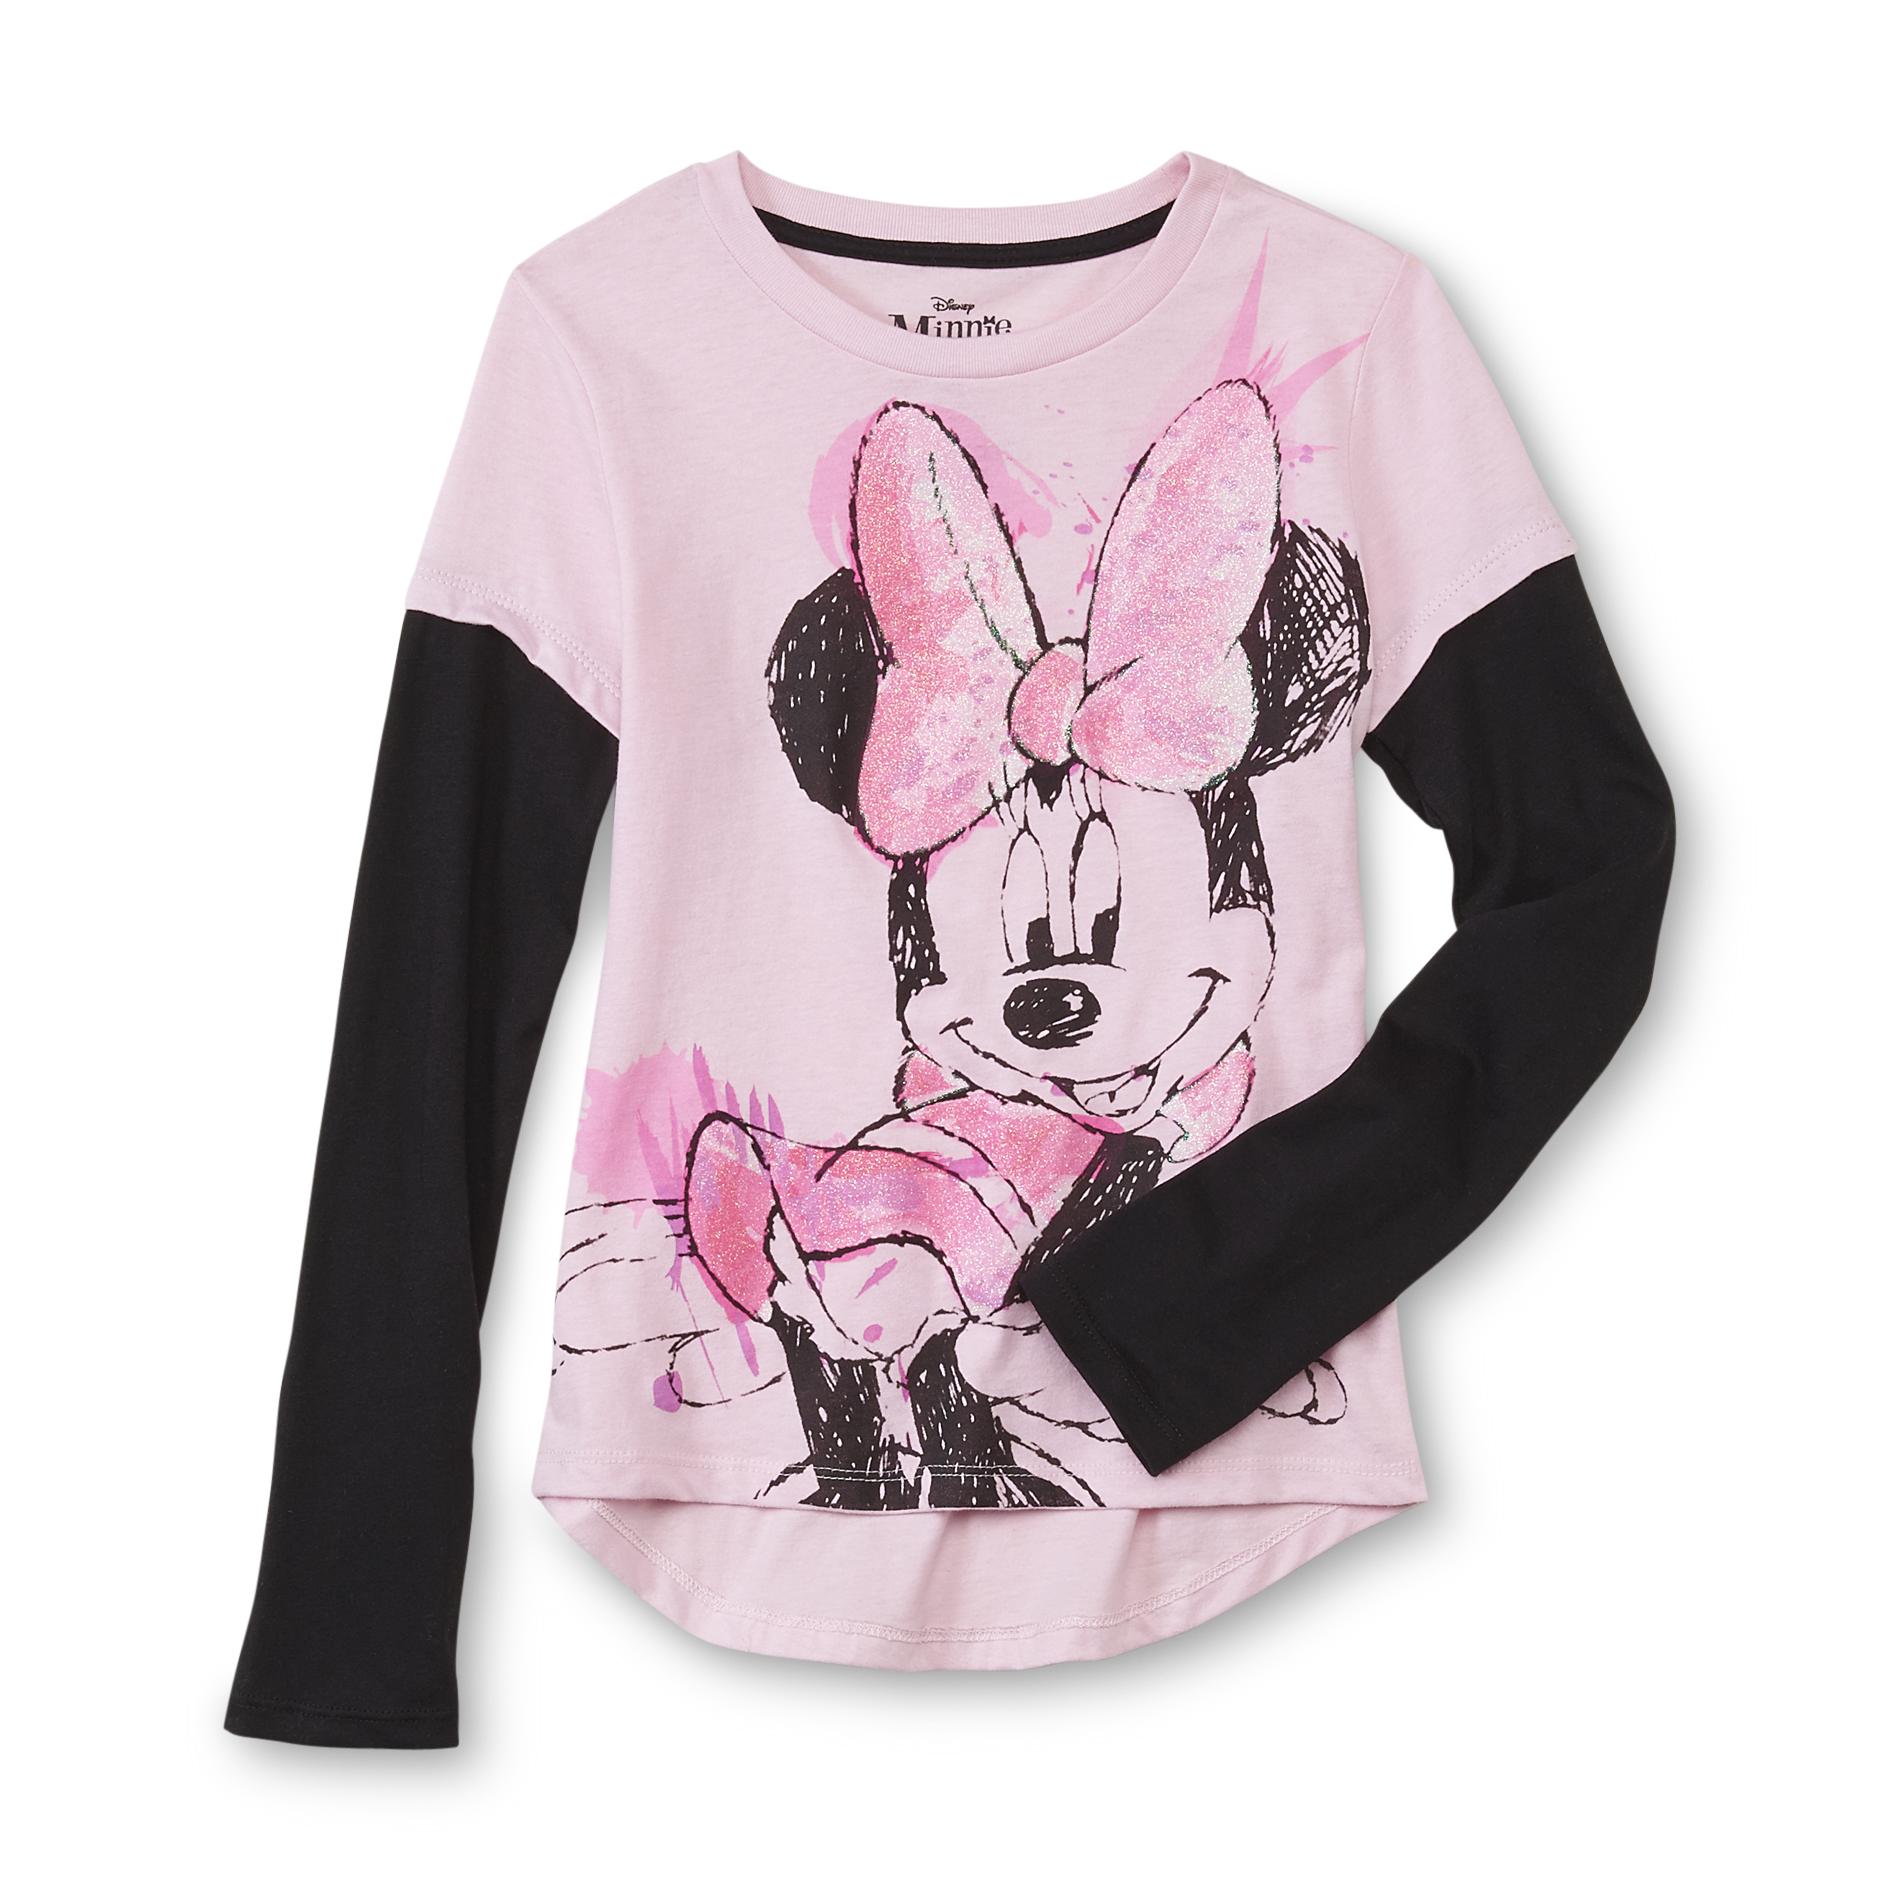 Disney Minnie Mouse Girl's Glittered Graphic T-Shirt